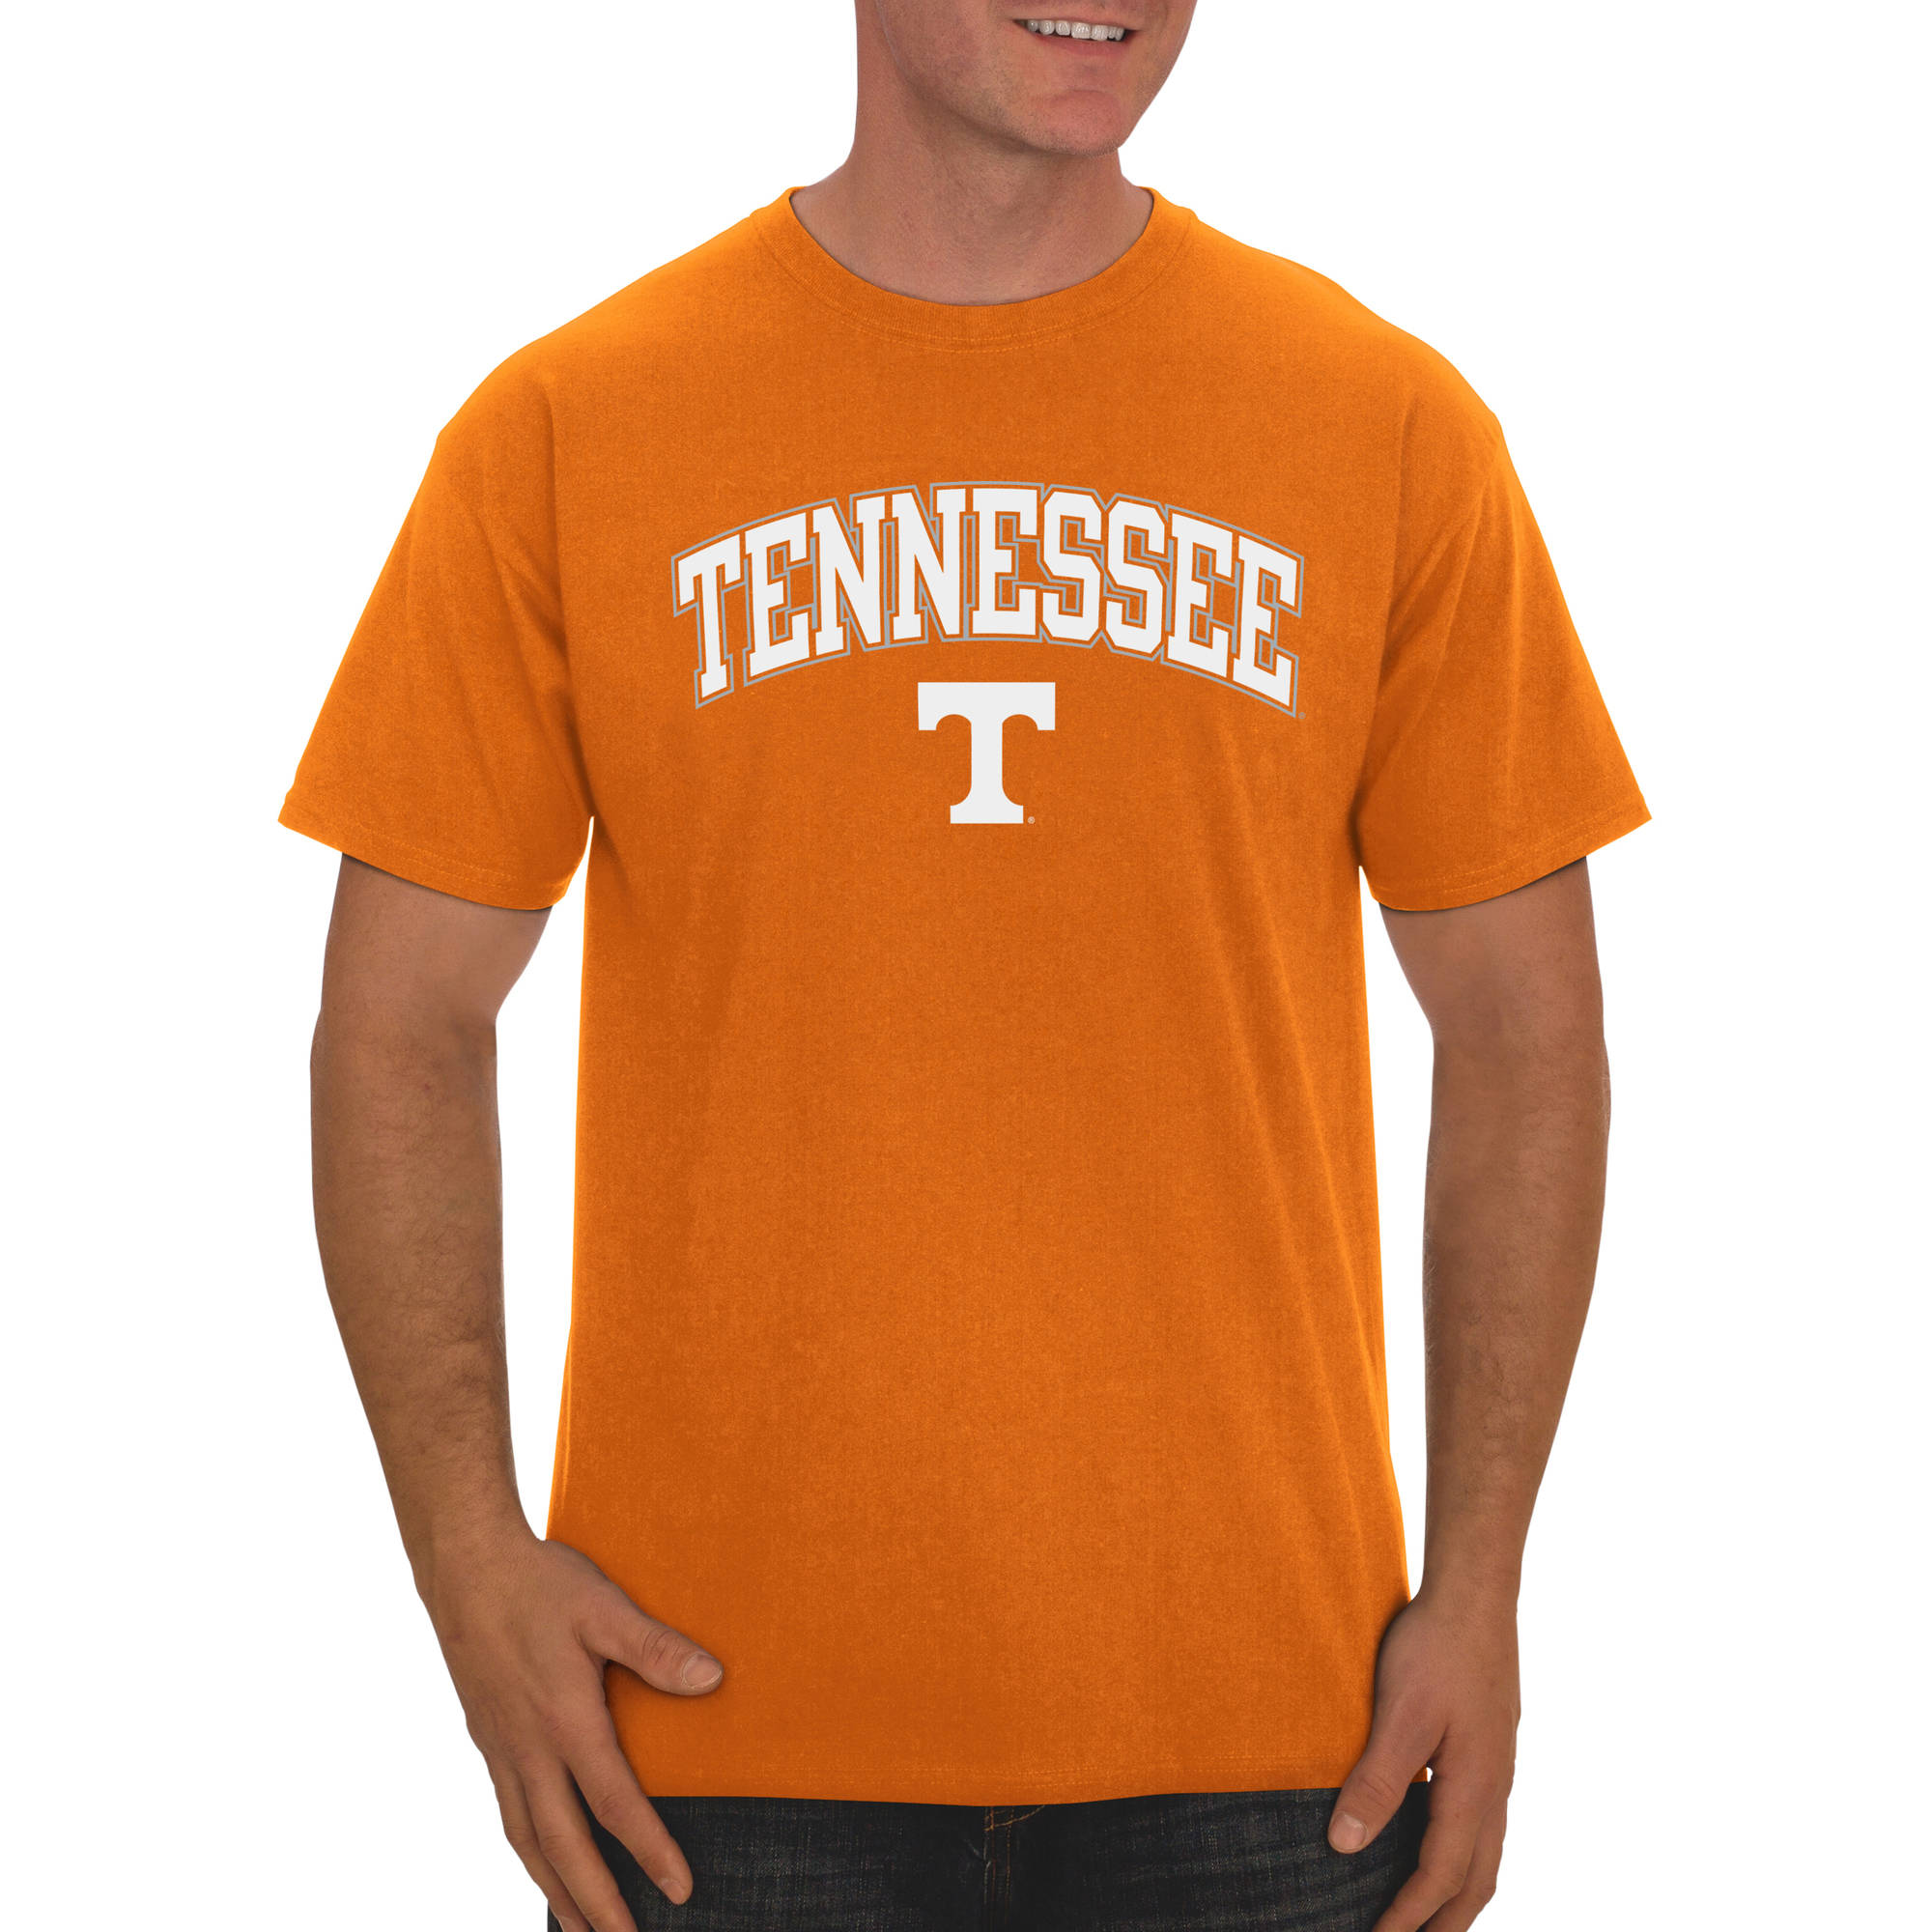 NCAA Tennessee Volunteers, Men's Classic Cotton T-Shirt - image 1 of 3